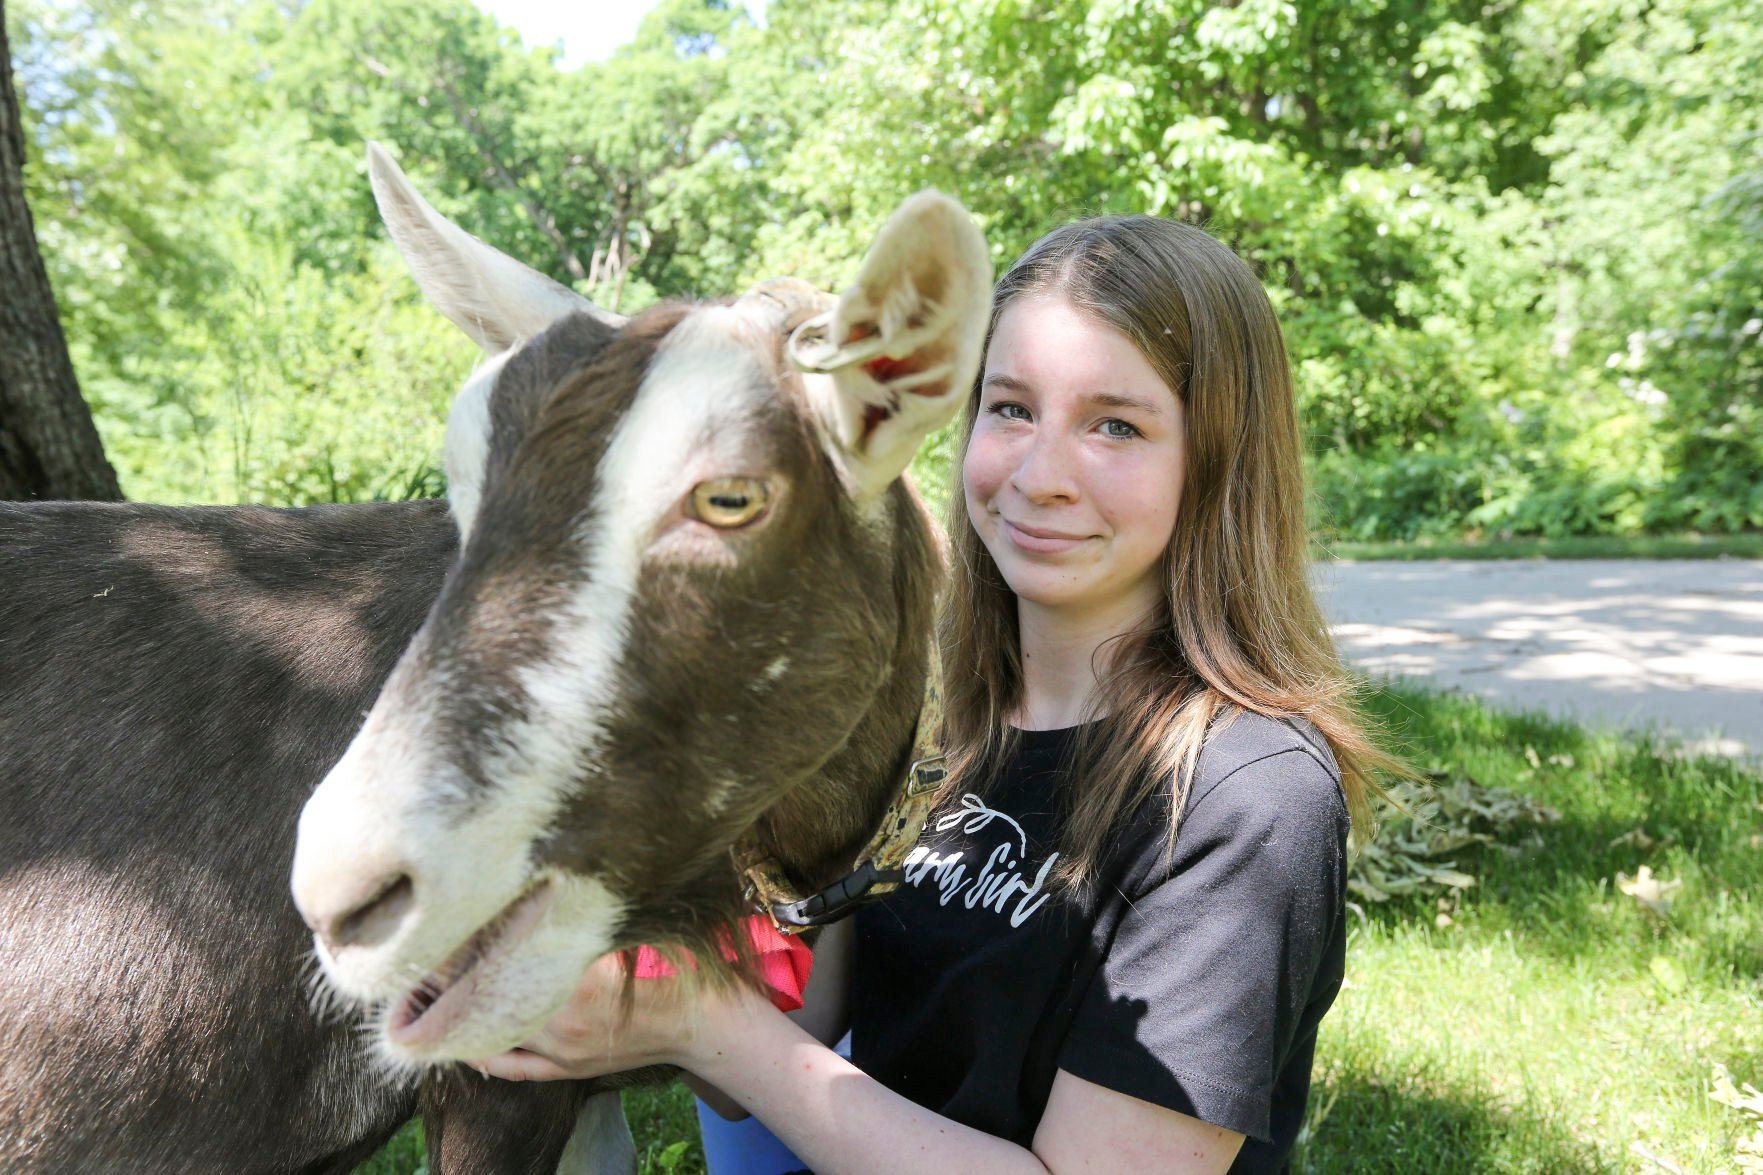 Taylor Hilkin, 13, seen here with her goat, Fern, was a finalist at the Hy-Vee OpportUNITY Inclusive Business Summit in Cedar Rapids recently where she pitched her business, Crazy Goat Soap, in a “Shark Tank”-style competition.    PHOTO CREDIT: Dave Kettering